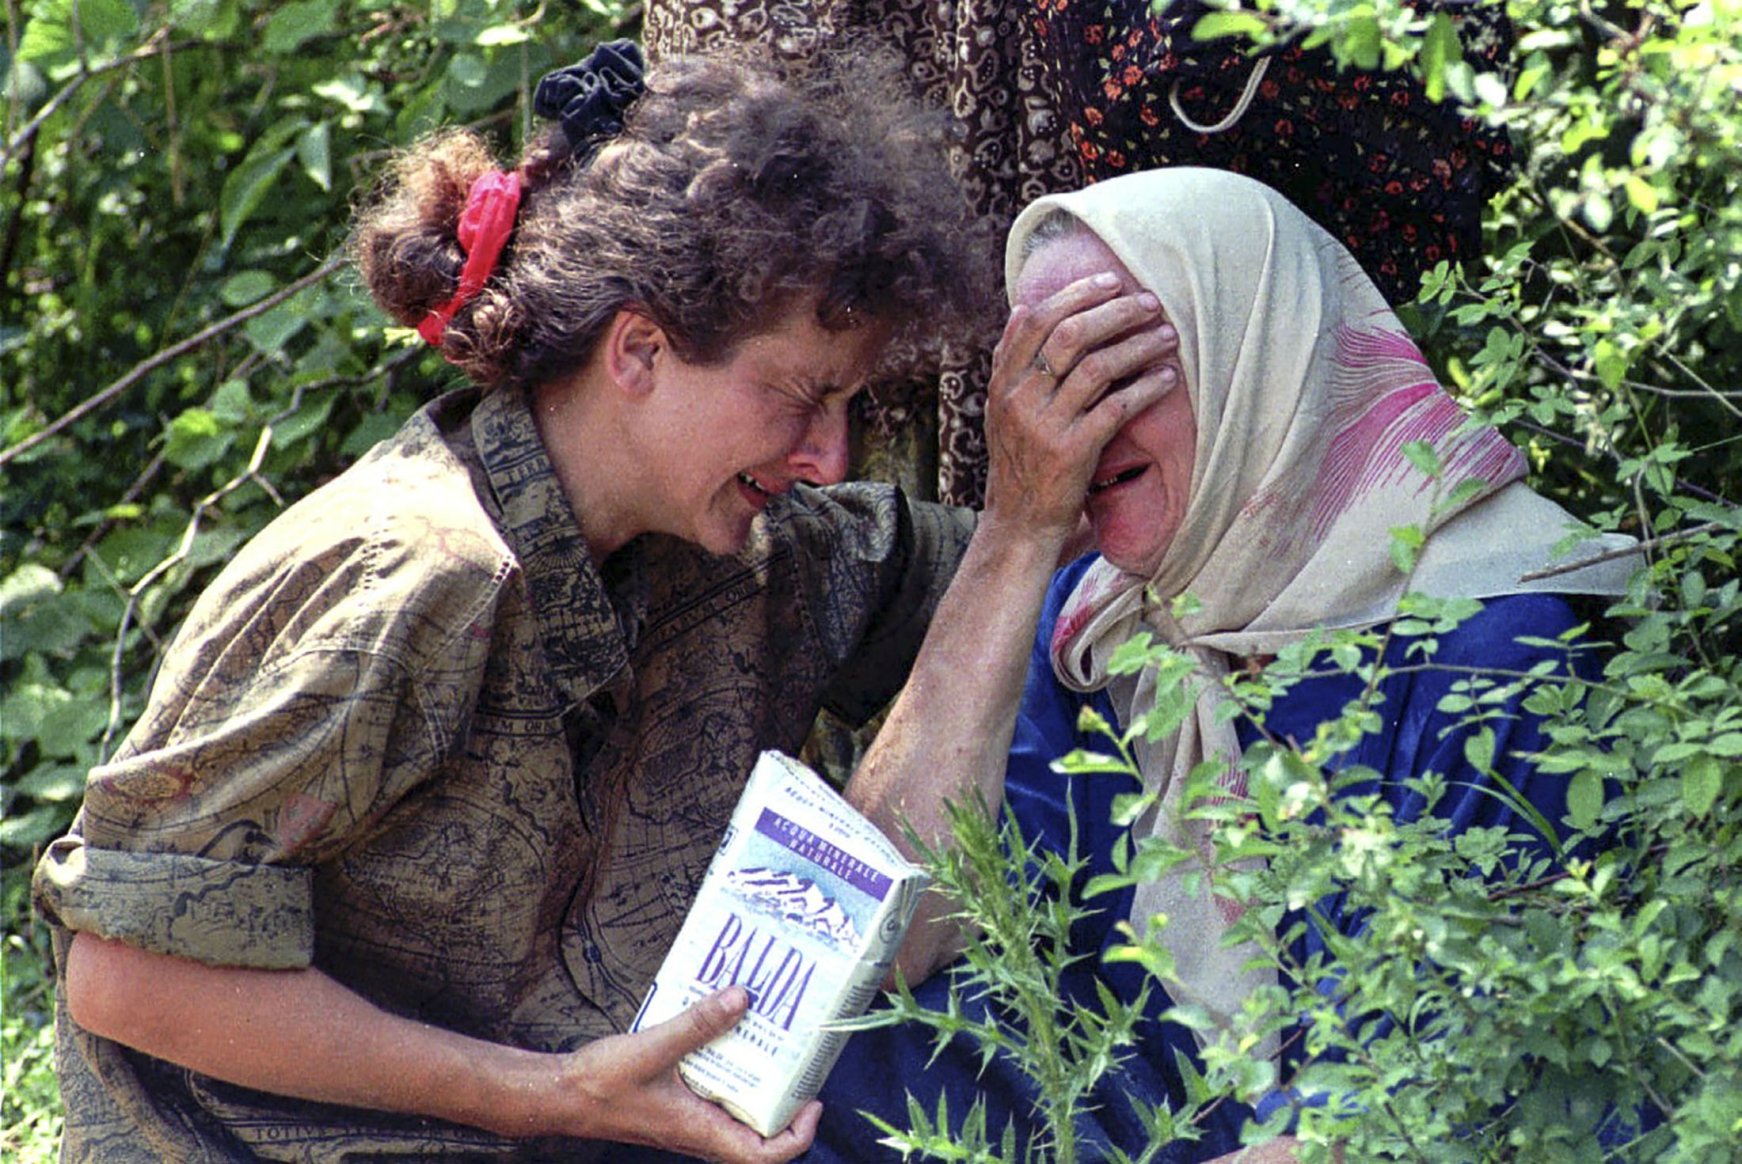 The Bosnian War was characterised by bitter fighting, indiscriminate shelling of cities and towns, ethnic cleansing, and systematic mass rape, mainly perpetrated by Serb.